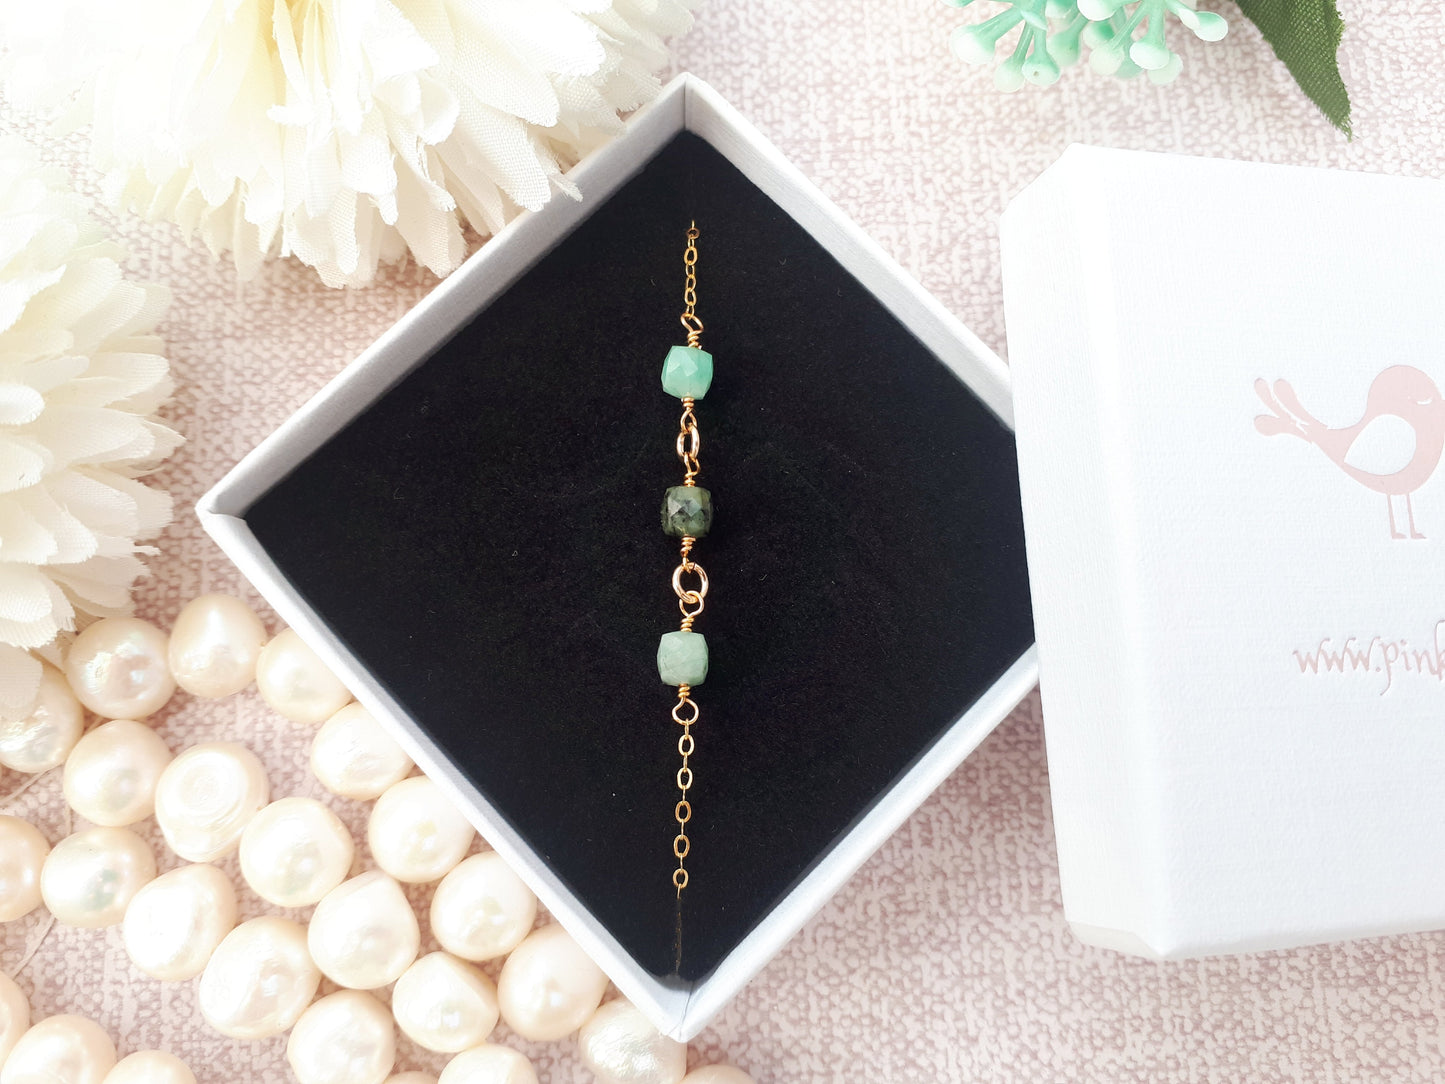 Emerald gemstone necklace in silver or gold.